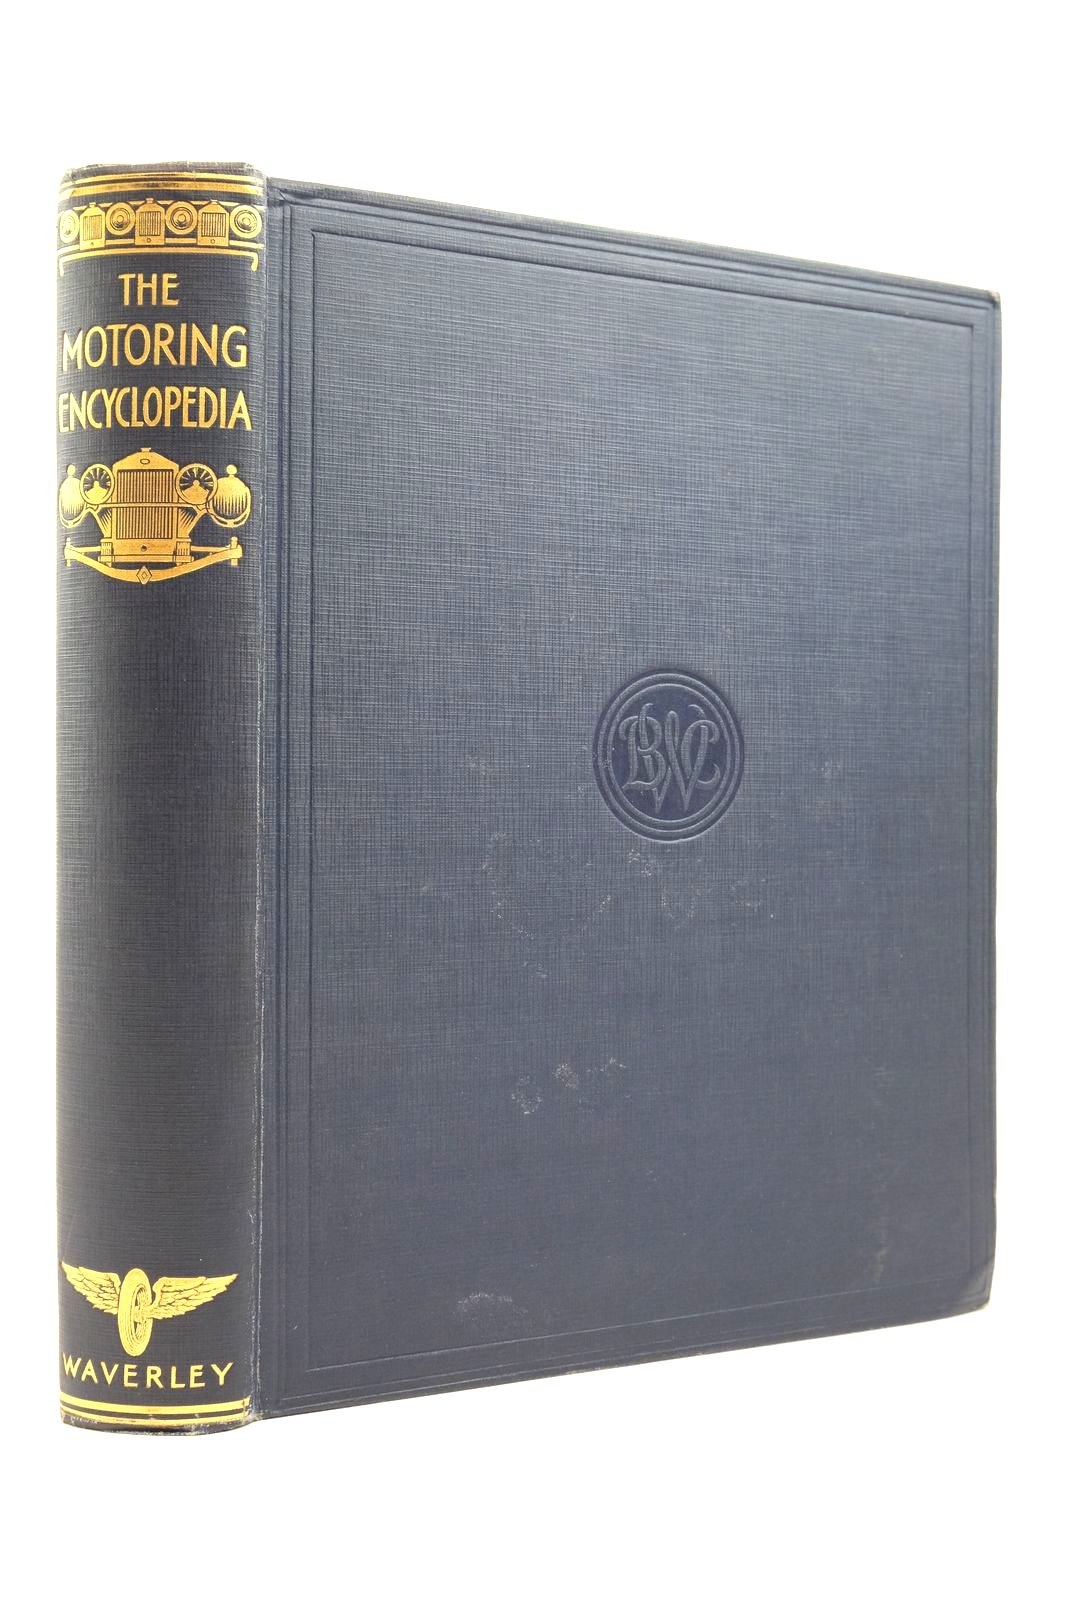 Photo of THE MOTORING ENCYCLOPEDIA &amp; TOURING GAZETTEER OF THE BRITISH ISLES written by Stubbs, S.G. Blaxland Manton, Greville G.O. Stewart, Oliver Geddes, Donald published by The Waverley Book Company Ltd. (STOCK CODE: 2139061)  for sale by Stella & Rose's Books